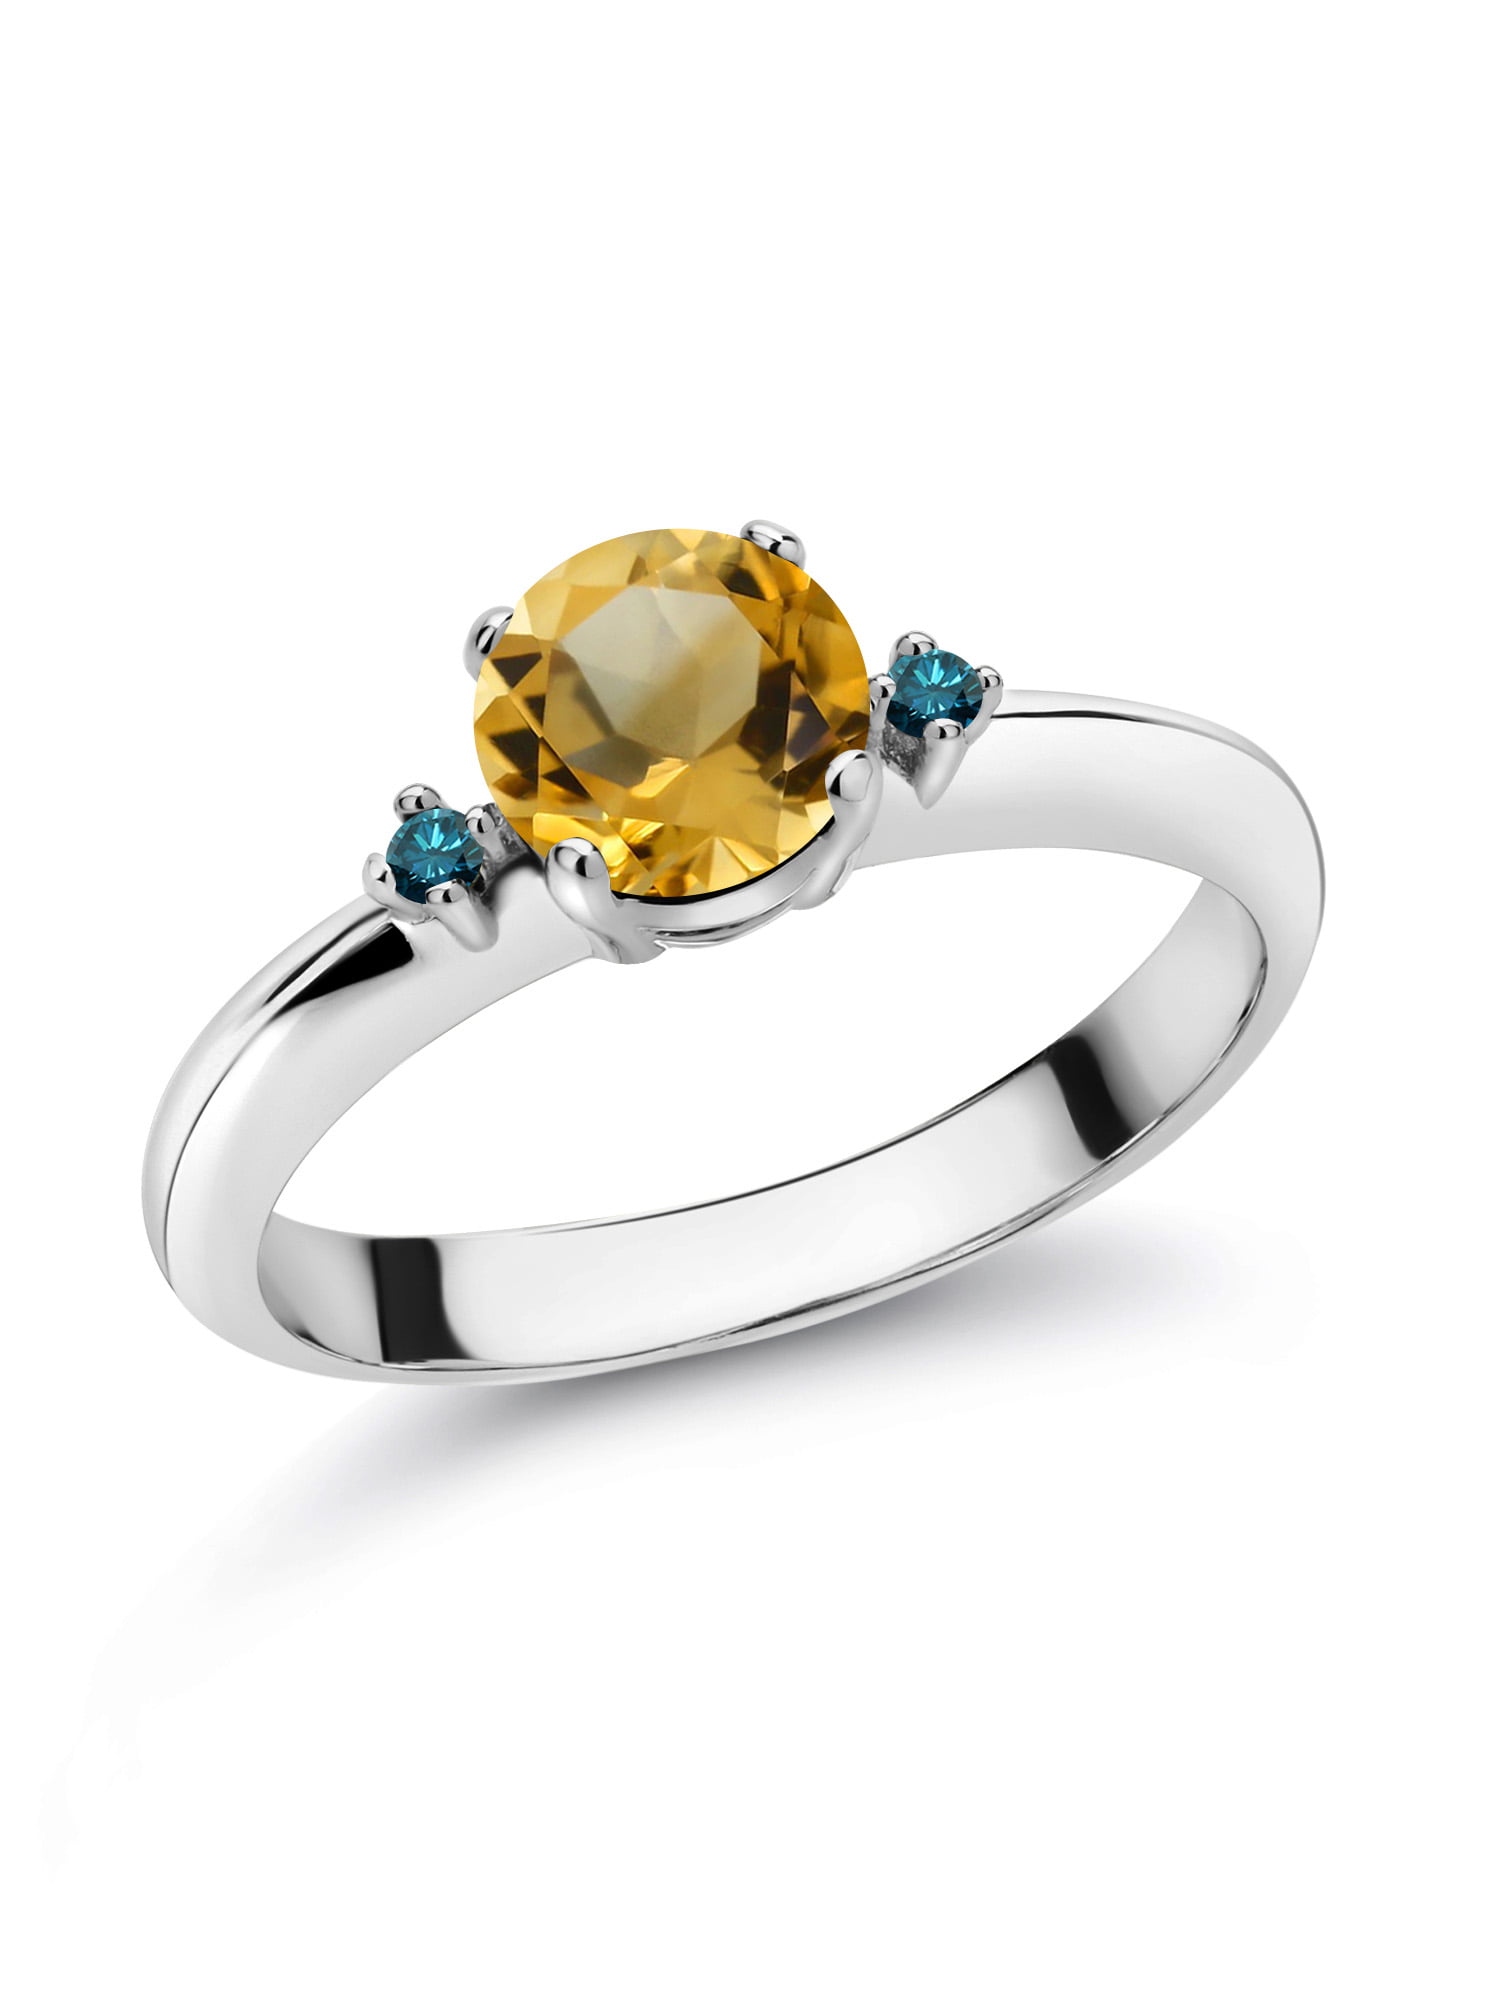 Gem Stone King 0.83 Ct Sky Blue Topaz White Diamond 925 Yellow Gold Plated Silver 3-Stone Ring